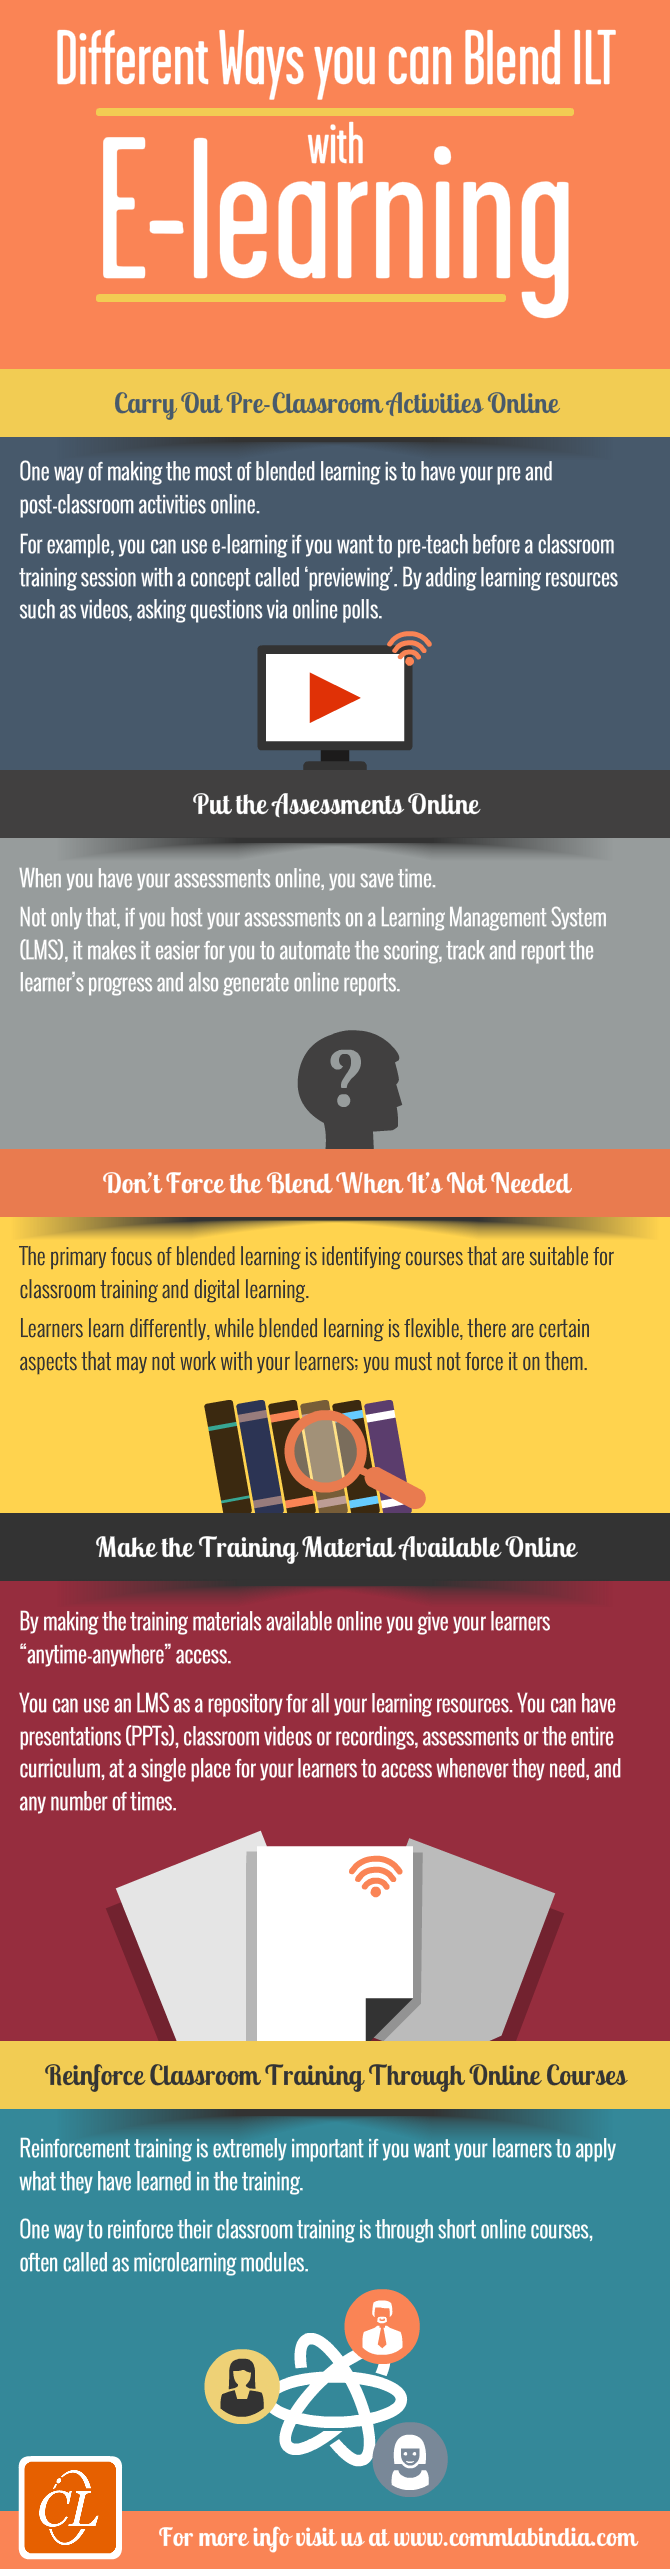 Different Ways You Can Blend ILT with E-learning [Infographic]